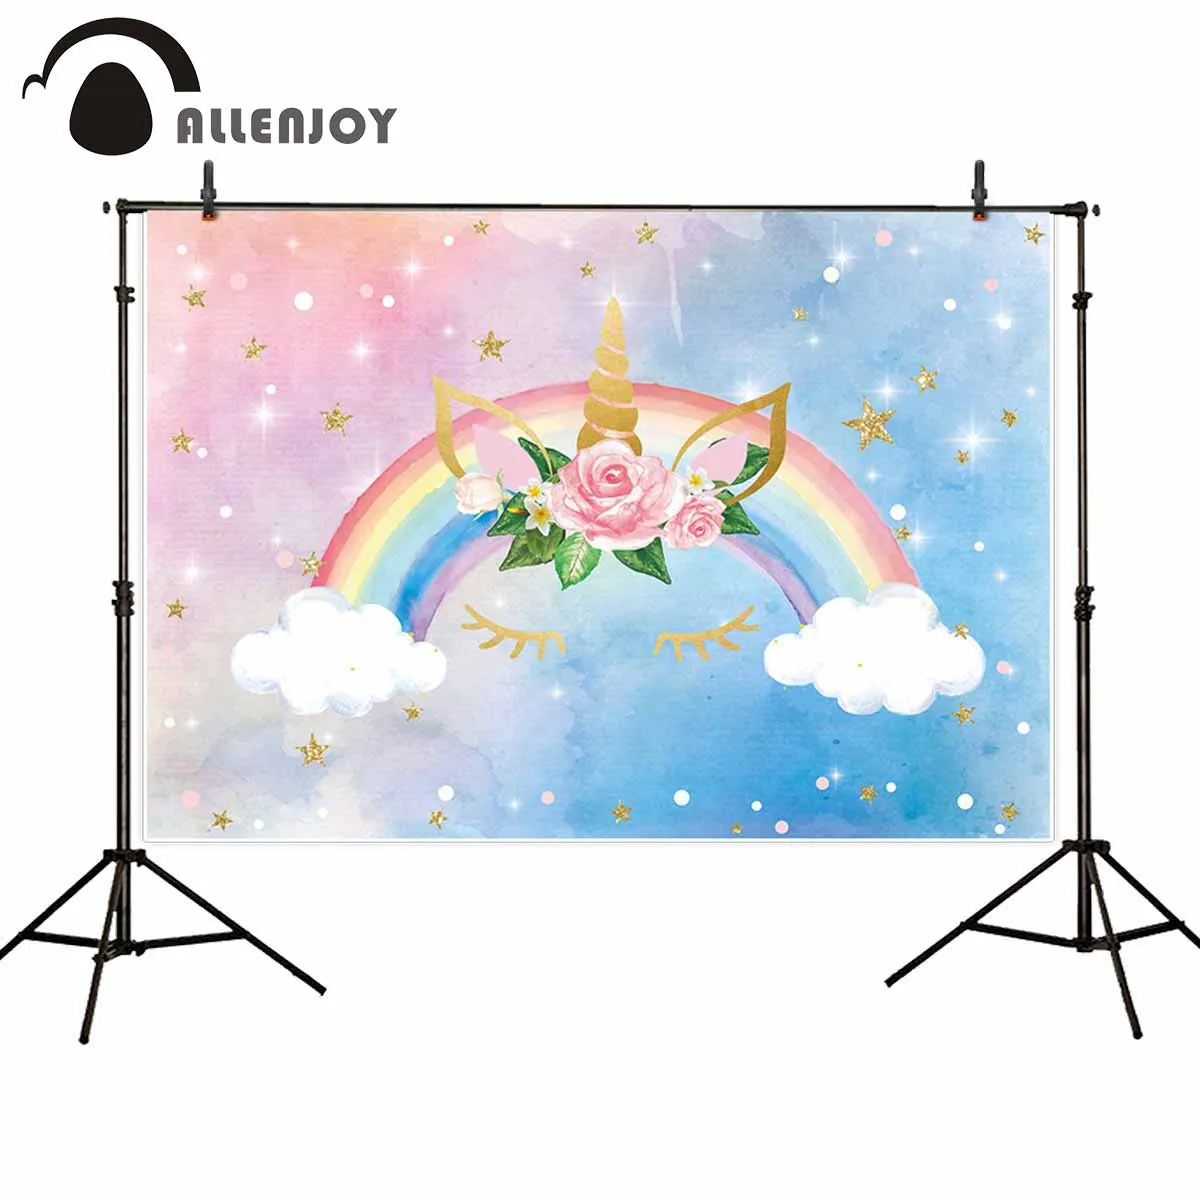 

Allenjoy backgrounds for photography studio flower gold stars glitter pink blue gradient sky backdrop Unicorn rainbow photocall